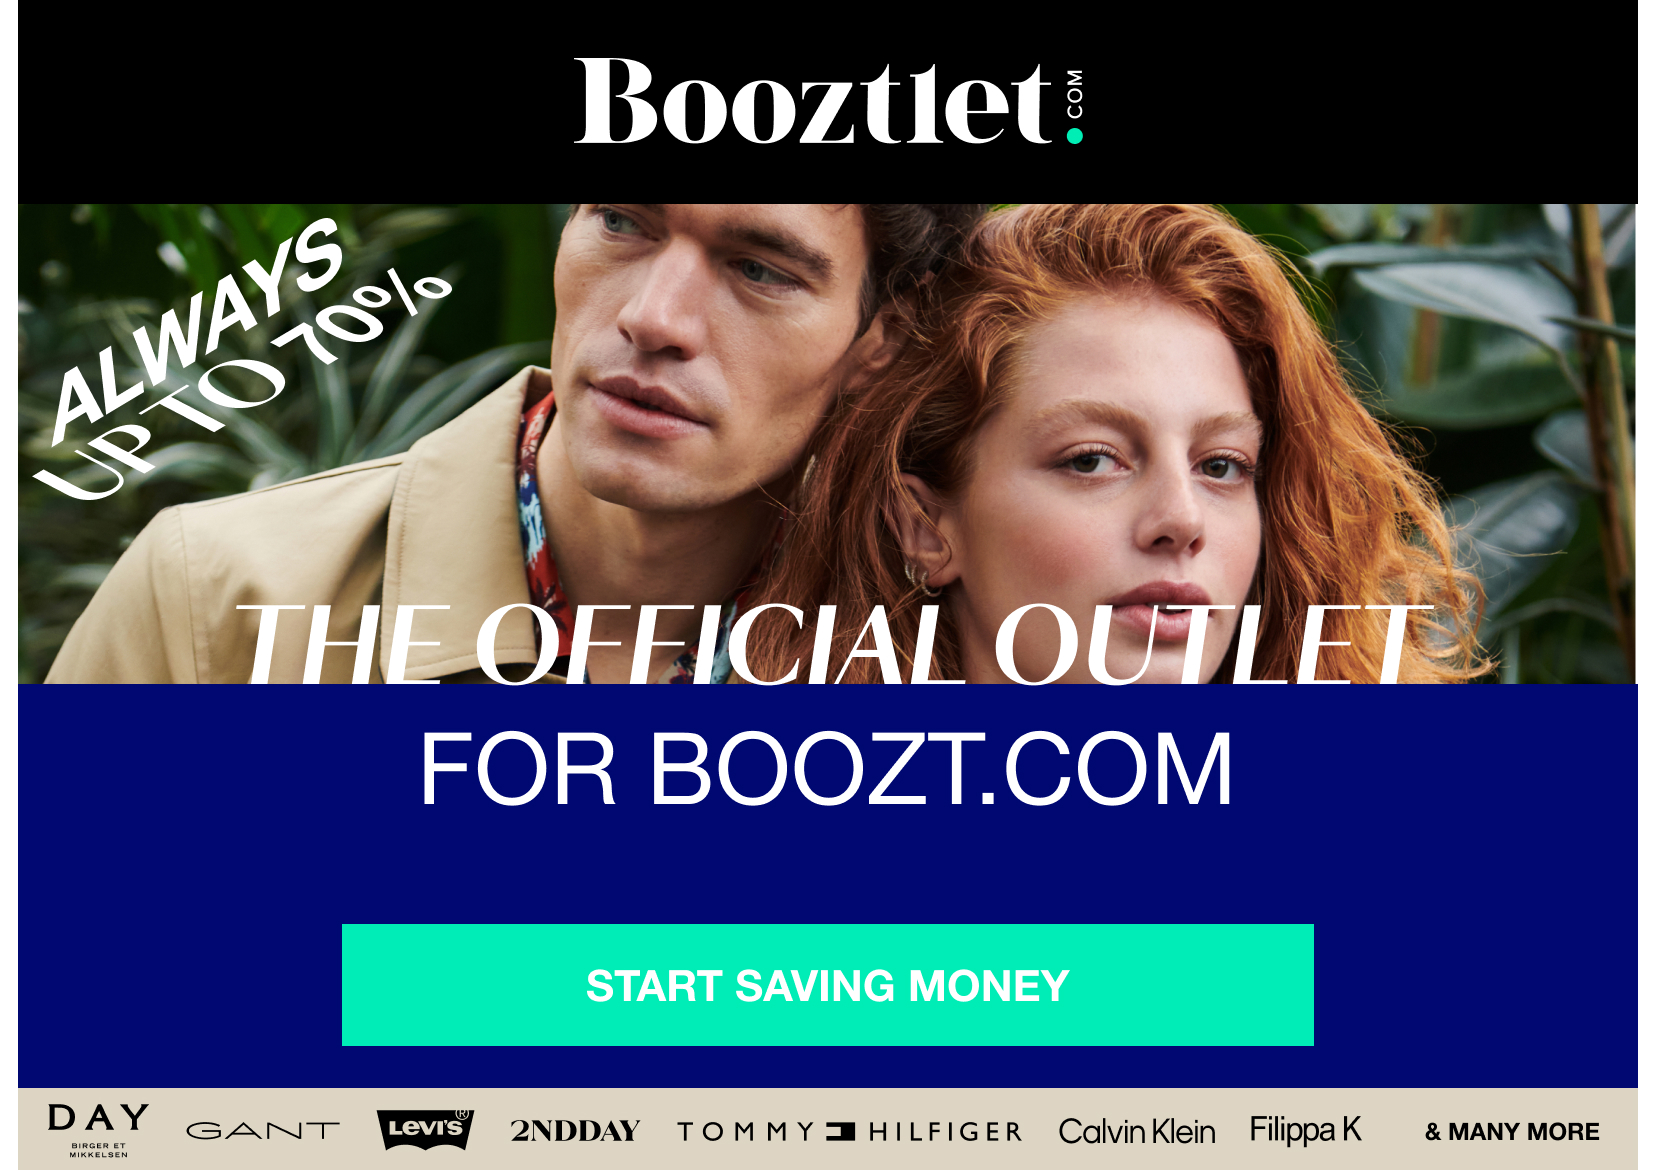  Boozuet: B T d % it N . g N W b N N START SAVING MONEY DAY arT VERY 2NDDAY TOMMYMHILFIGER CahinKlein FiippaK MANY MORE 